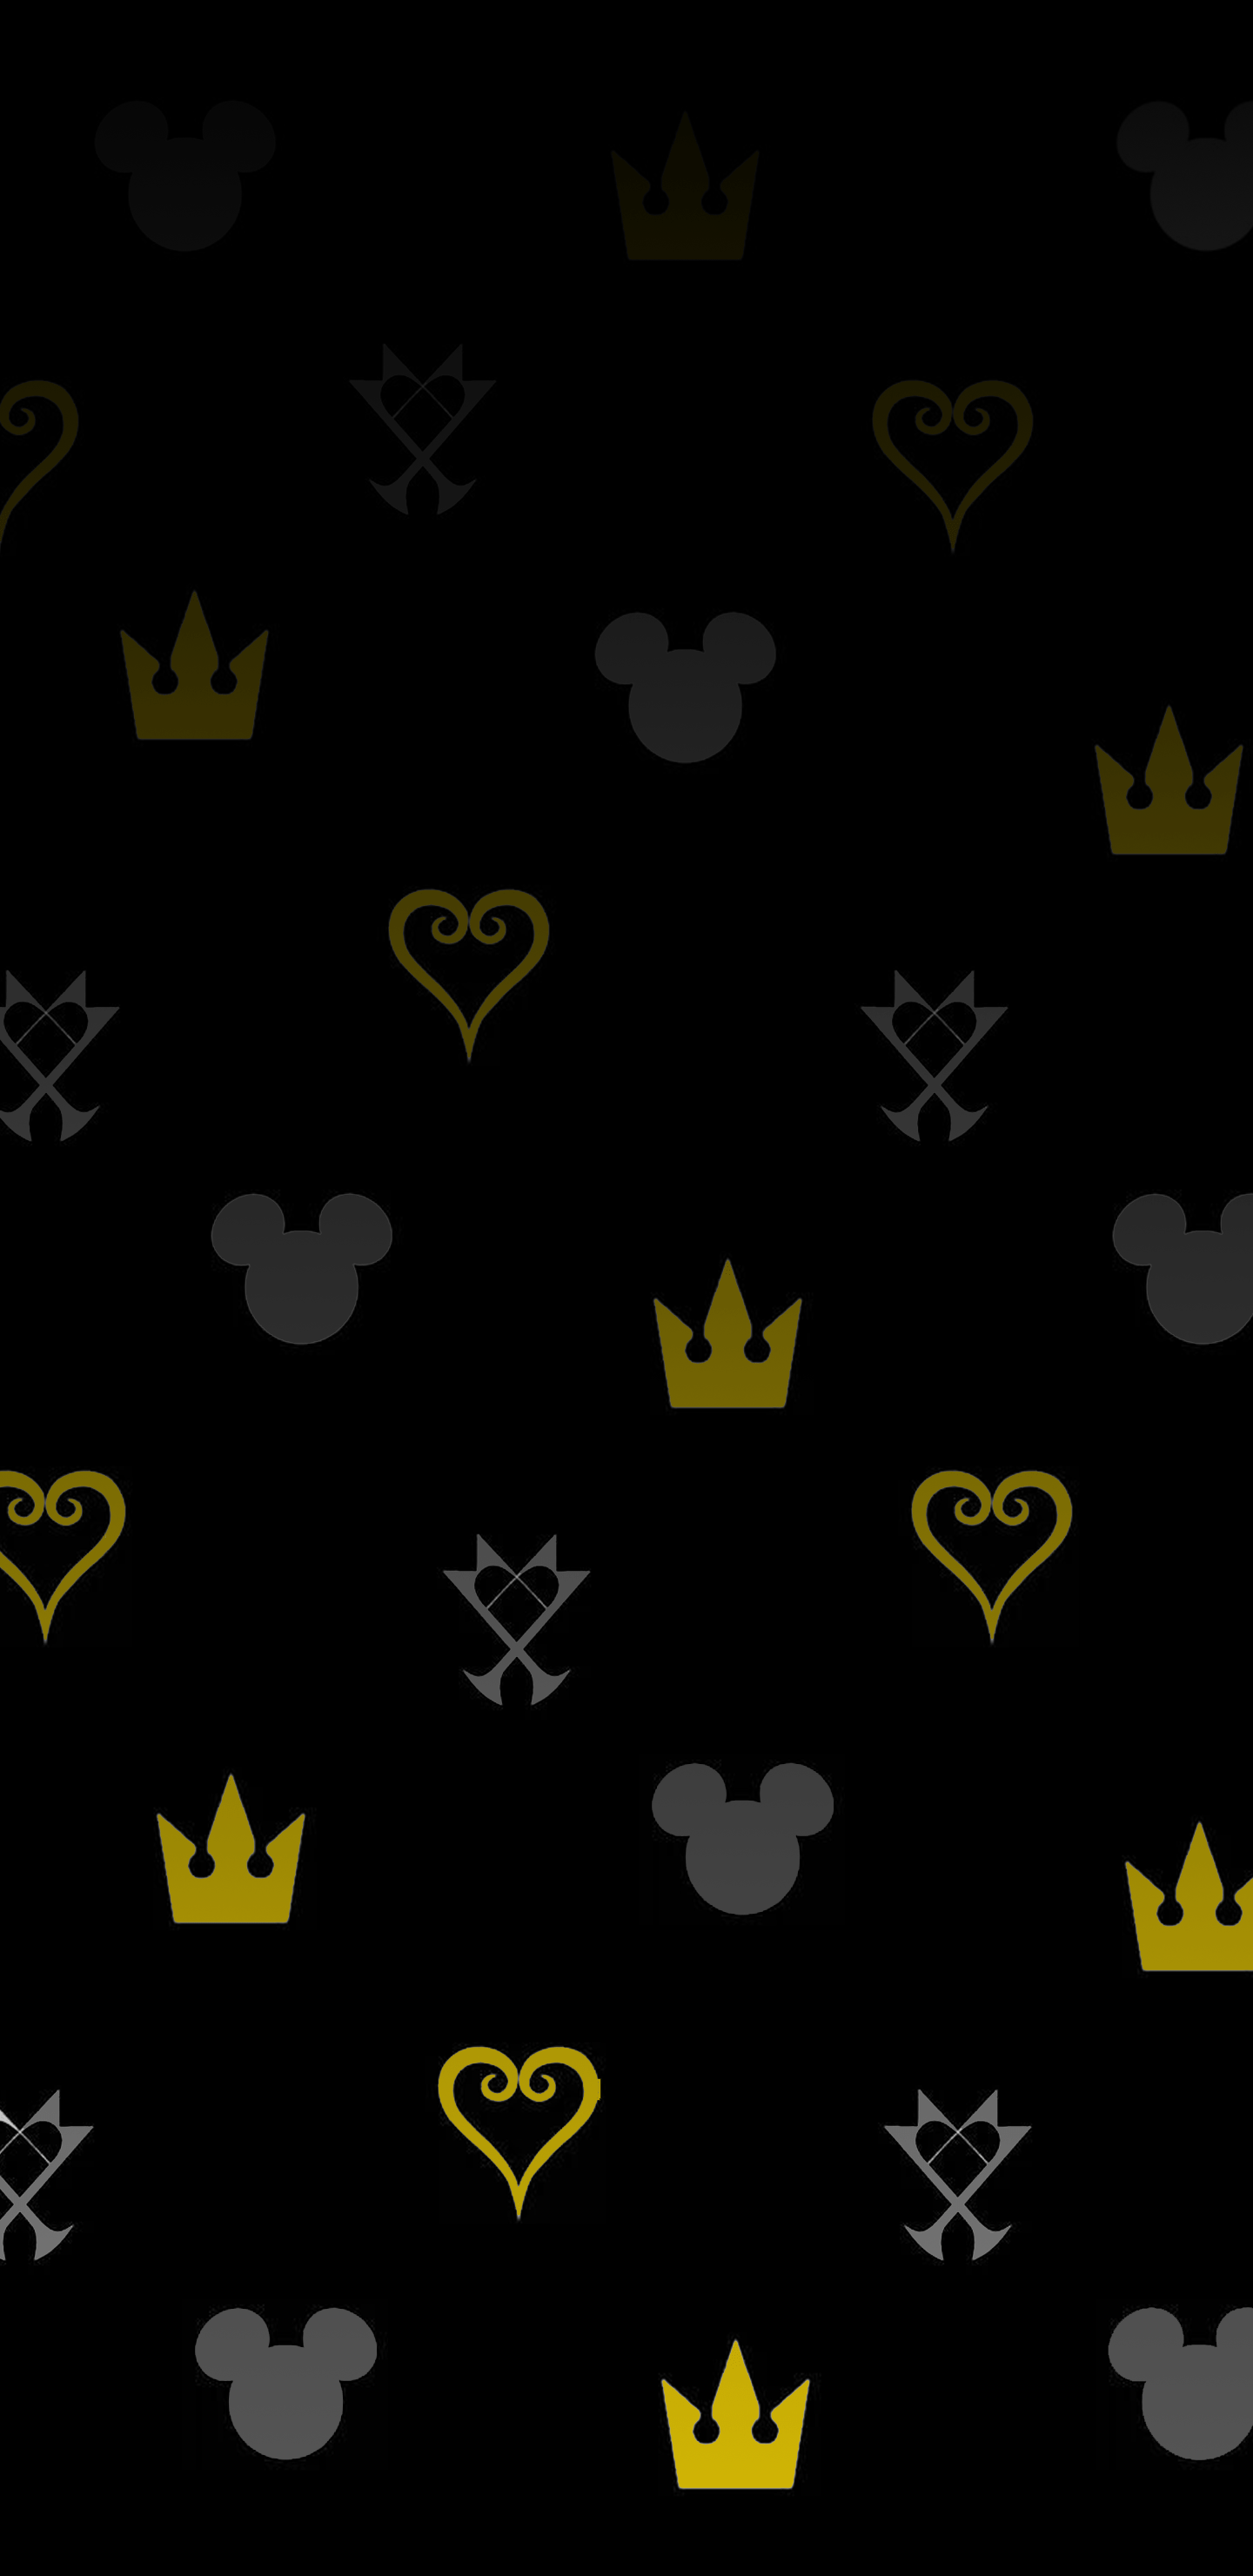 Kingdom Hearts Phone Wallpaper 64 pictures